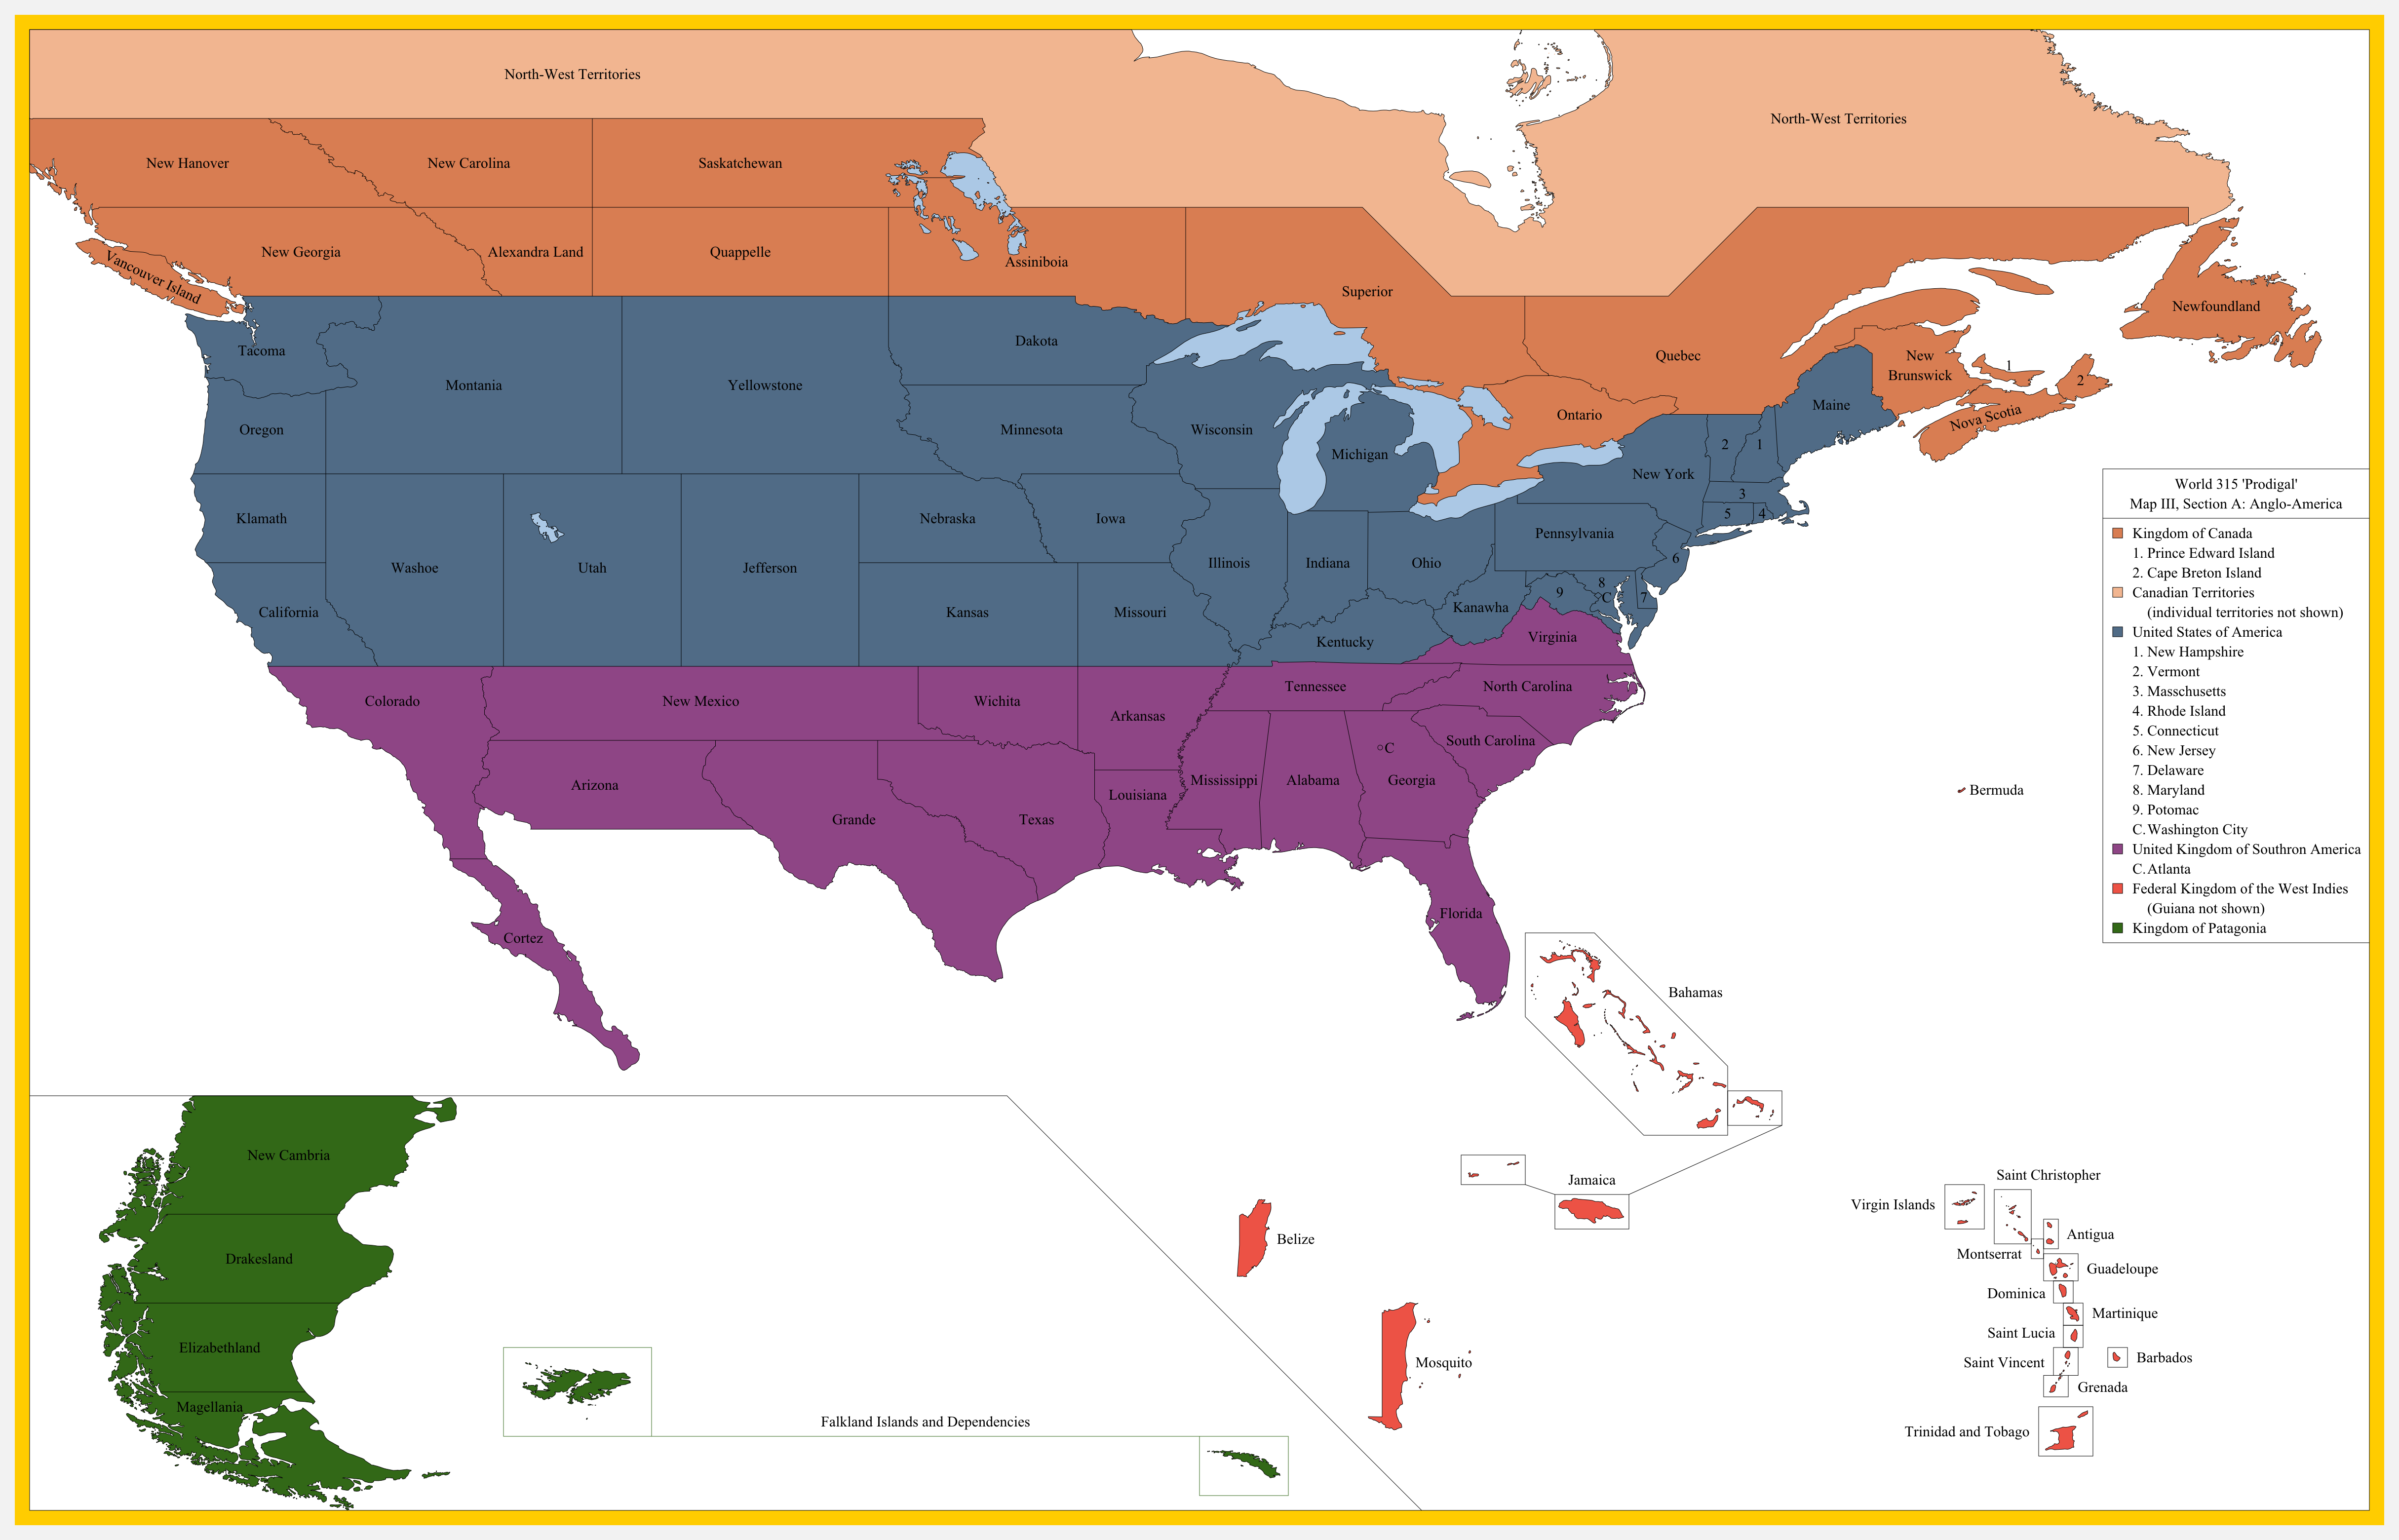 prodigal_son__map_of_anglo_america_by_theurbannight-dcc2pwb.png